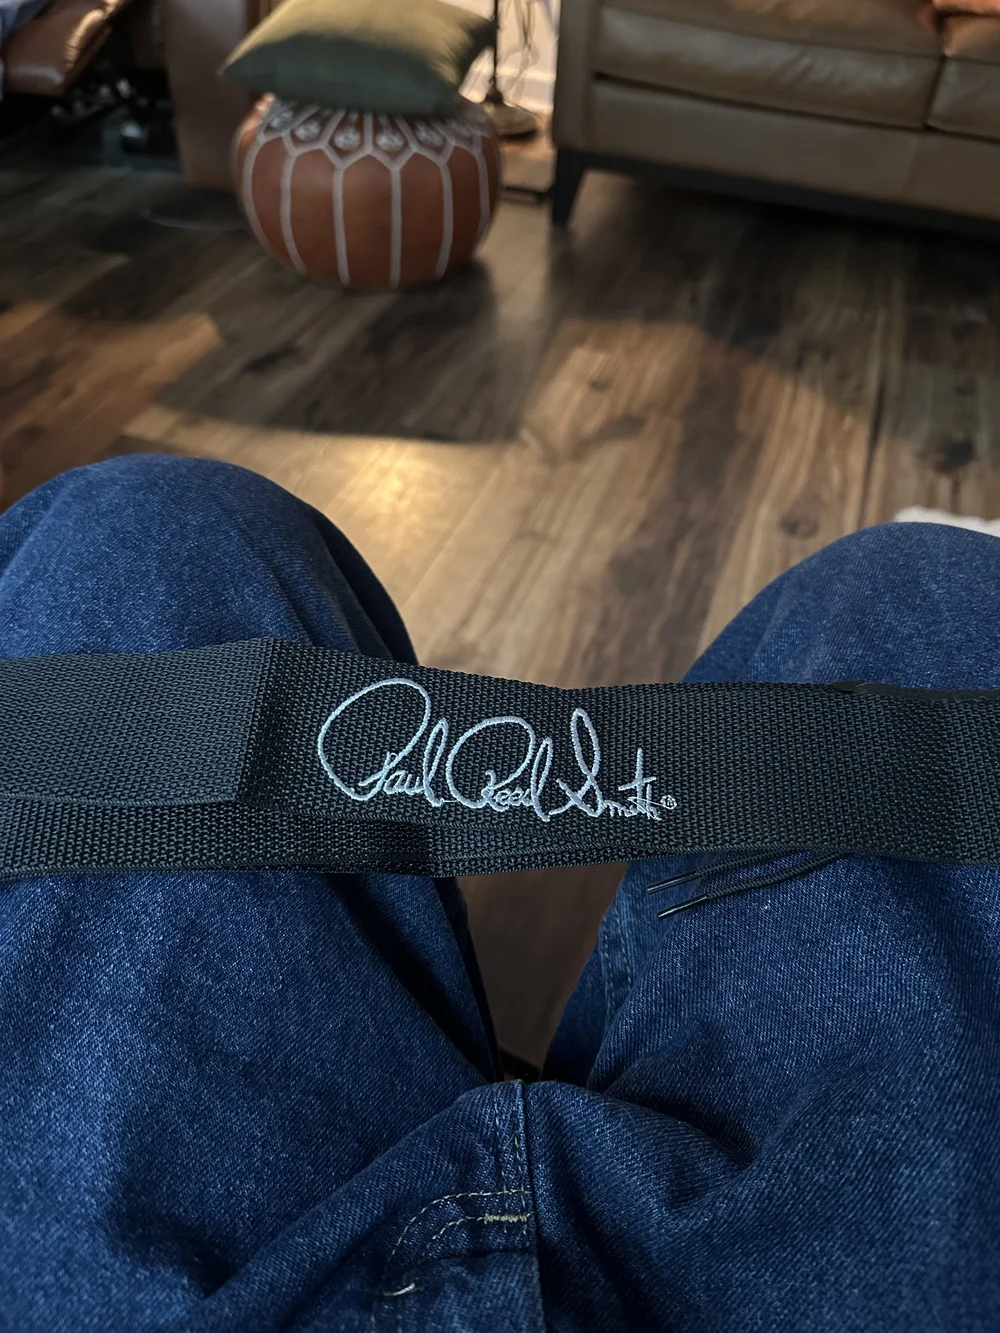 Paul Reed Smith strap